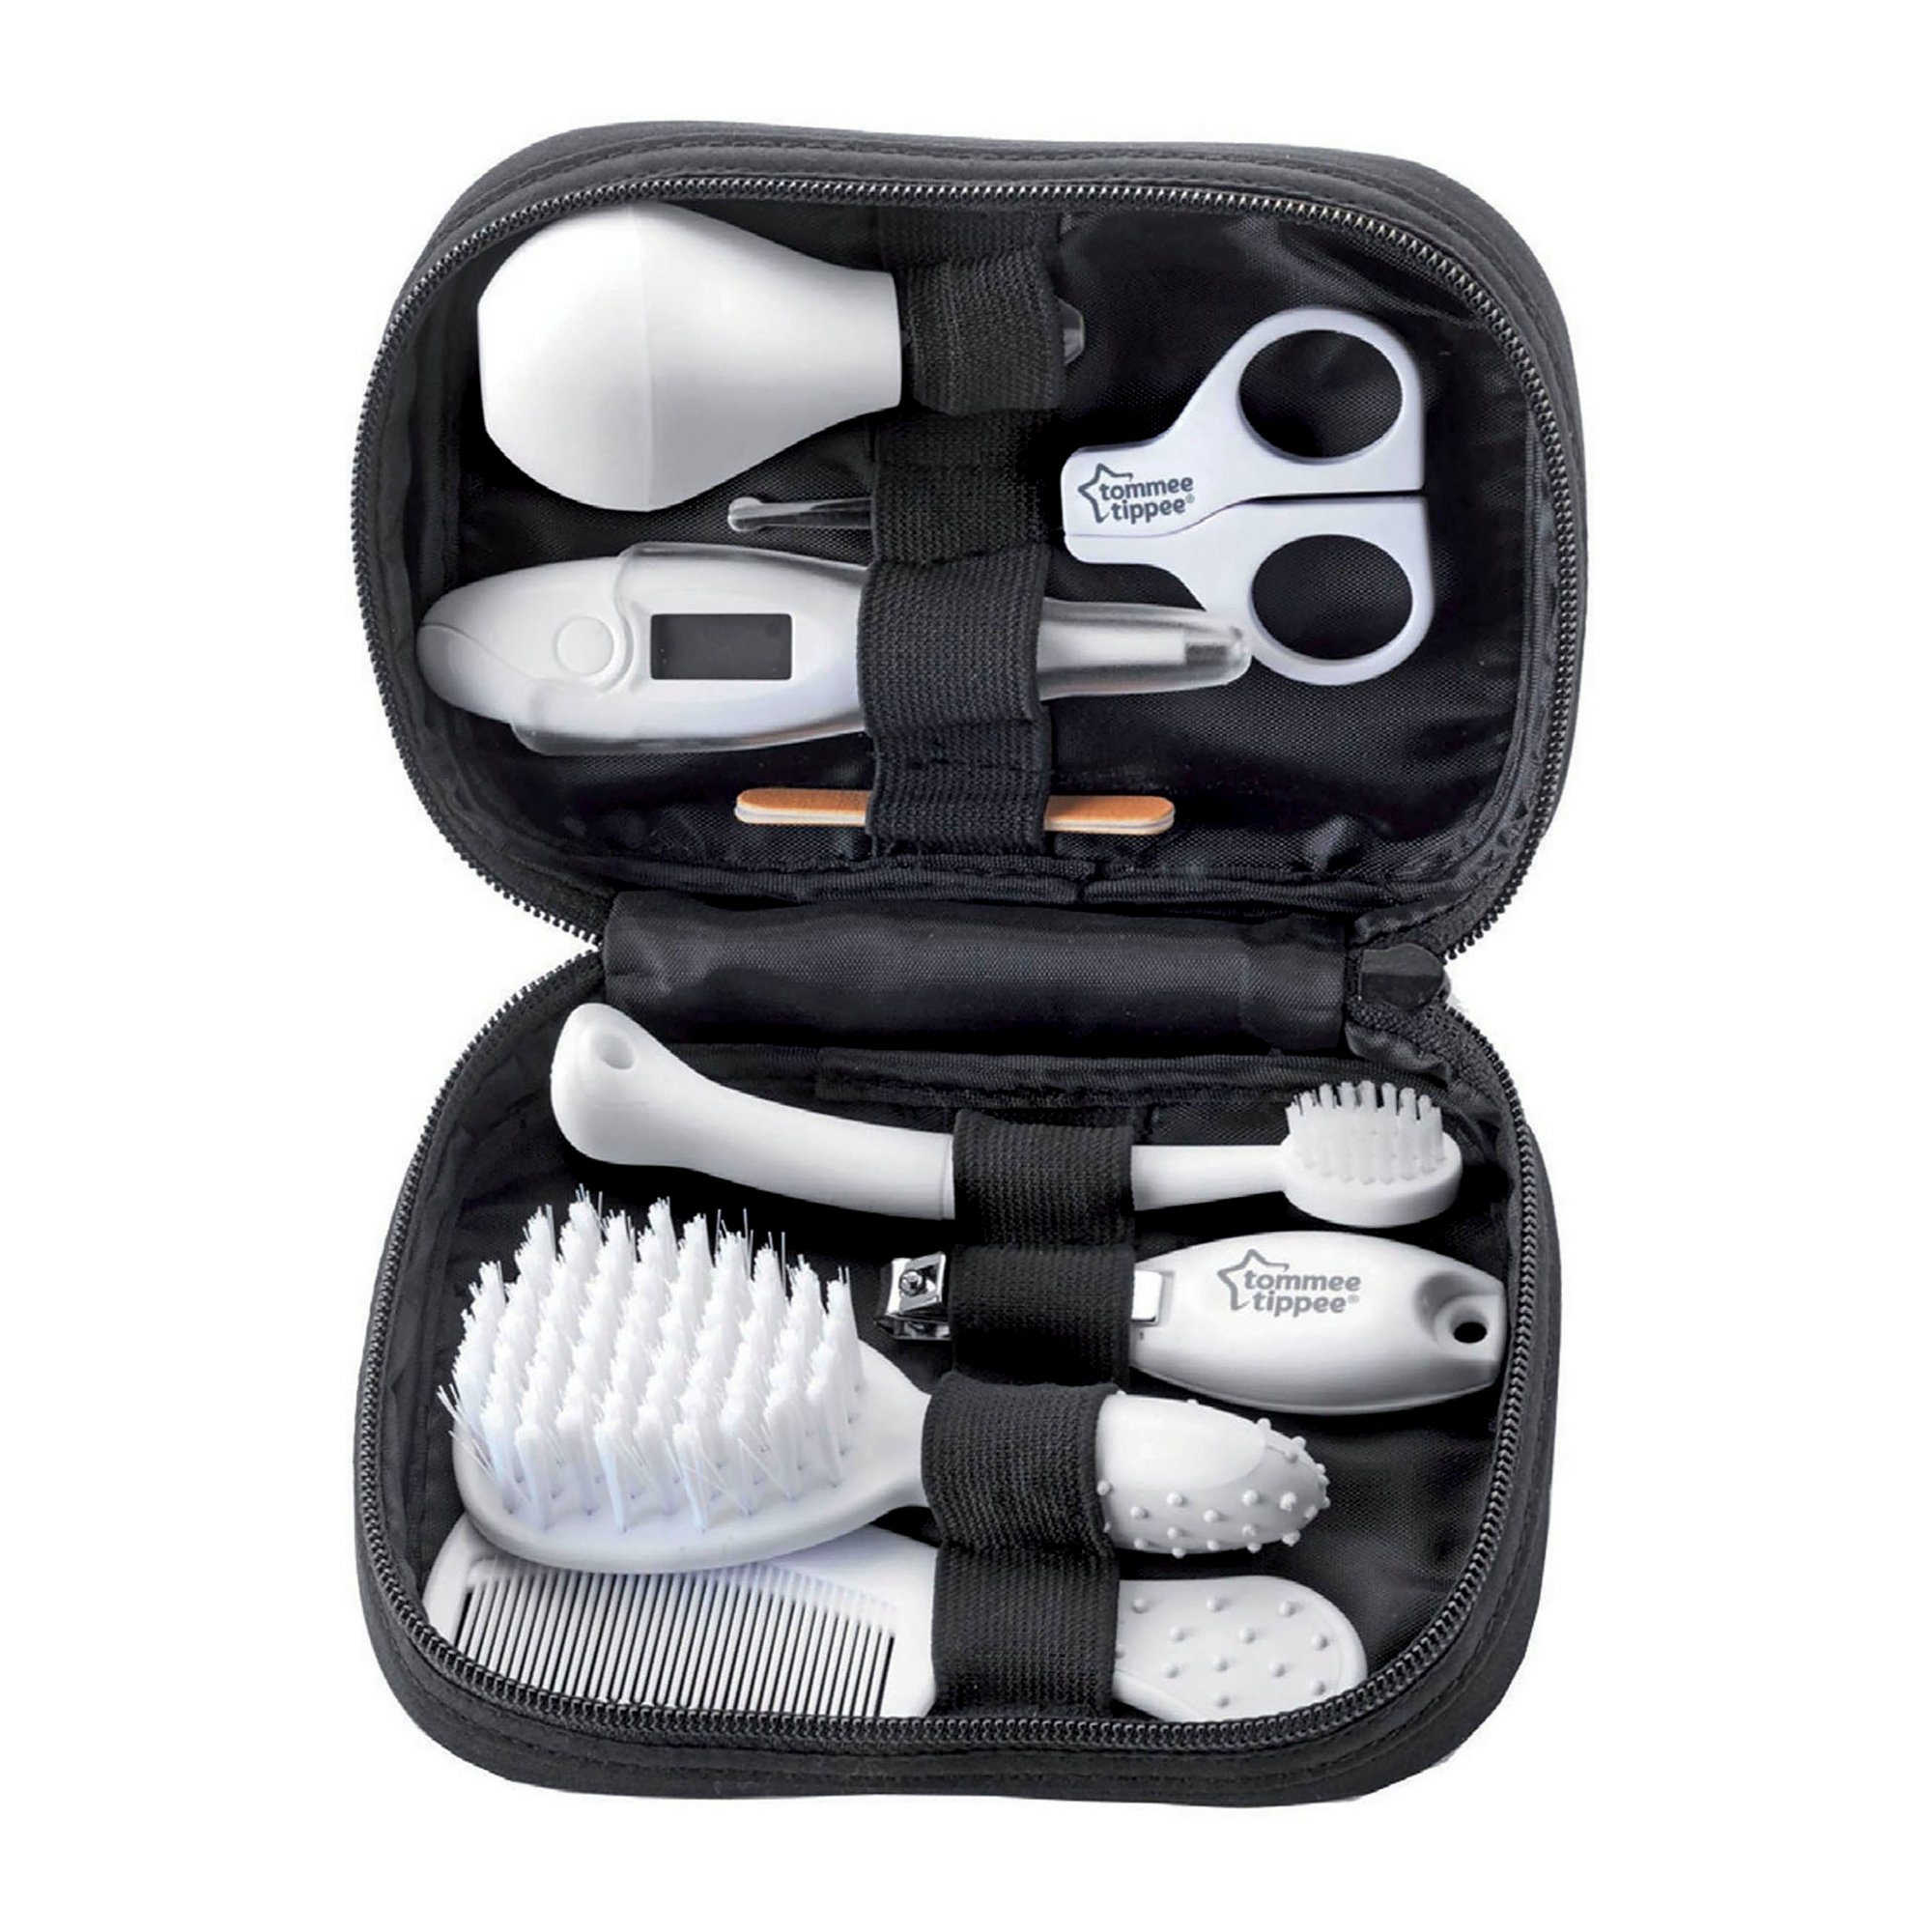 Tommee Tippee Baby Healthcare and Grooming Set